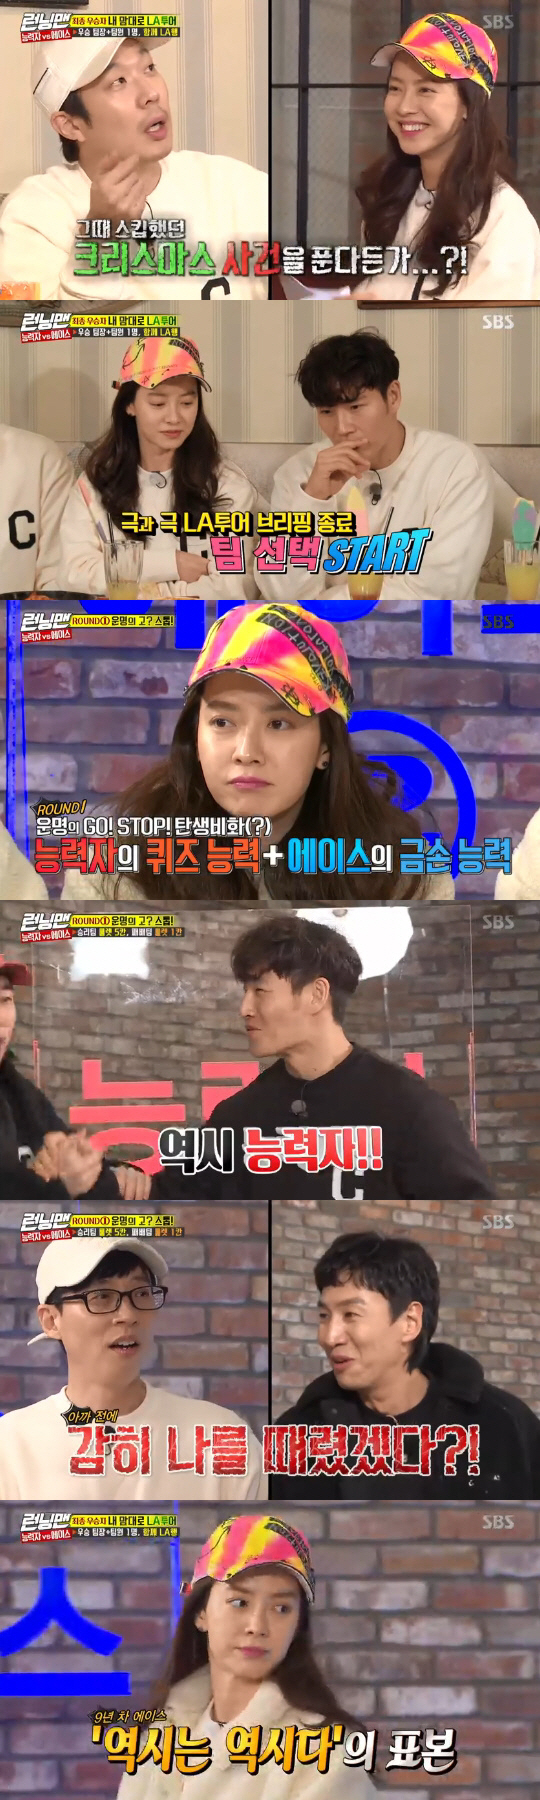 Running Man Song Ji-hyo wins finalOn SBS Running Man broadcasted on the afternoon of the 10th, Ace Song Ji-hyo vs. Kim Jong-kook was confronted.Kim Jong-kook and Song Ji-hyo were selected as the final winners of the Level Up Project, which lasted for the past four weeks, and won the Baekji Winning Gift Certificate.However, the production team received a proposal from the production team, Will you take the prize money? Will you share it together?The two men laughed at Choices for single without hesitation and boasted of their 9-year friendship (?) for Running Man.Kim Jong-kook and Song Ji-hyo were then asked what they wanted to do when they took the prize money.Kim Jong-kook said, Im going to LA, where I always talked. Second home. 24-hour shooting is welcome. I love it.Song Ji-hyo, who heard this, said, I want to feel that LA too. Both of them decided to travel to LA.Kim Jong-kook and Song Ji-hyo teamed up with the members to get full support for the trip to LA.Kim Jong-kook and Song Ji-hyo explained their respective LA travel plans in front of the members.First, Kim Jong-kook actively promoted the sunny weather, the traditional Korean food, the Dodger Stadium game, and the Santa Monica beach.In particular, he told Jeon So-min, There are many healthy and decent younger brothers in the area. It is possible enough to be a melodrama in a travel destination.Lee Kwang-soo said, I traveled together, and when I finally traveled with my brother, I have a lot to talk about and I am happy, but I lose 7kg.It has a diet effect, he said, laughing at the story.On the other hand, Song Ji-hyo proposed a free tour close to the opposite of Kim Jong-kook, and he received a strong backlash from the members.However, he got a hot response by putting a drink, a truth game, and a skip night full story with his ex-boyfriend as a winner.Afterwards, Ji Suk-jin, Yoo Jae-Suk, and Haha chorused Ace Song Ji-hyo, Lee Kwang-soo, Jeon So-min, and Yang Se-chan Choices Ability Kim Jong-kook.The race was followed by a mission featuring Song Ji-hyo and Kim Jong-kook.In the first round, Song Ji-hyo showed his main skill, gold-loss ability, and led the team to victory after repeatedly reversing the reverse.In the second round, Song Ji-hyos Ace team won with an unexpected performance; in the last three rounds, Kim Jong-kooks athletes team hit back and won.For the final one-man selection, the two turned roulette together, and as a result, Song Ji-hyo won the final championship and confirmed his trip to LA.